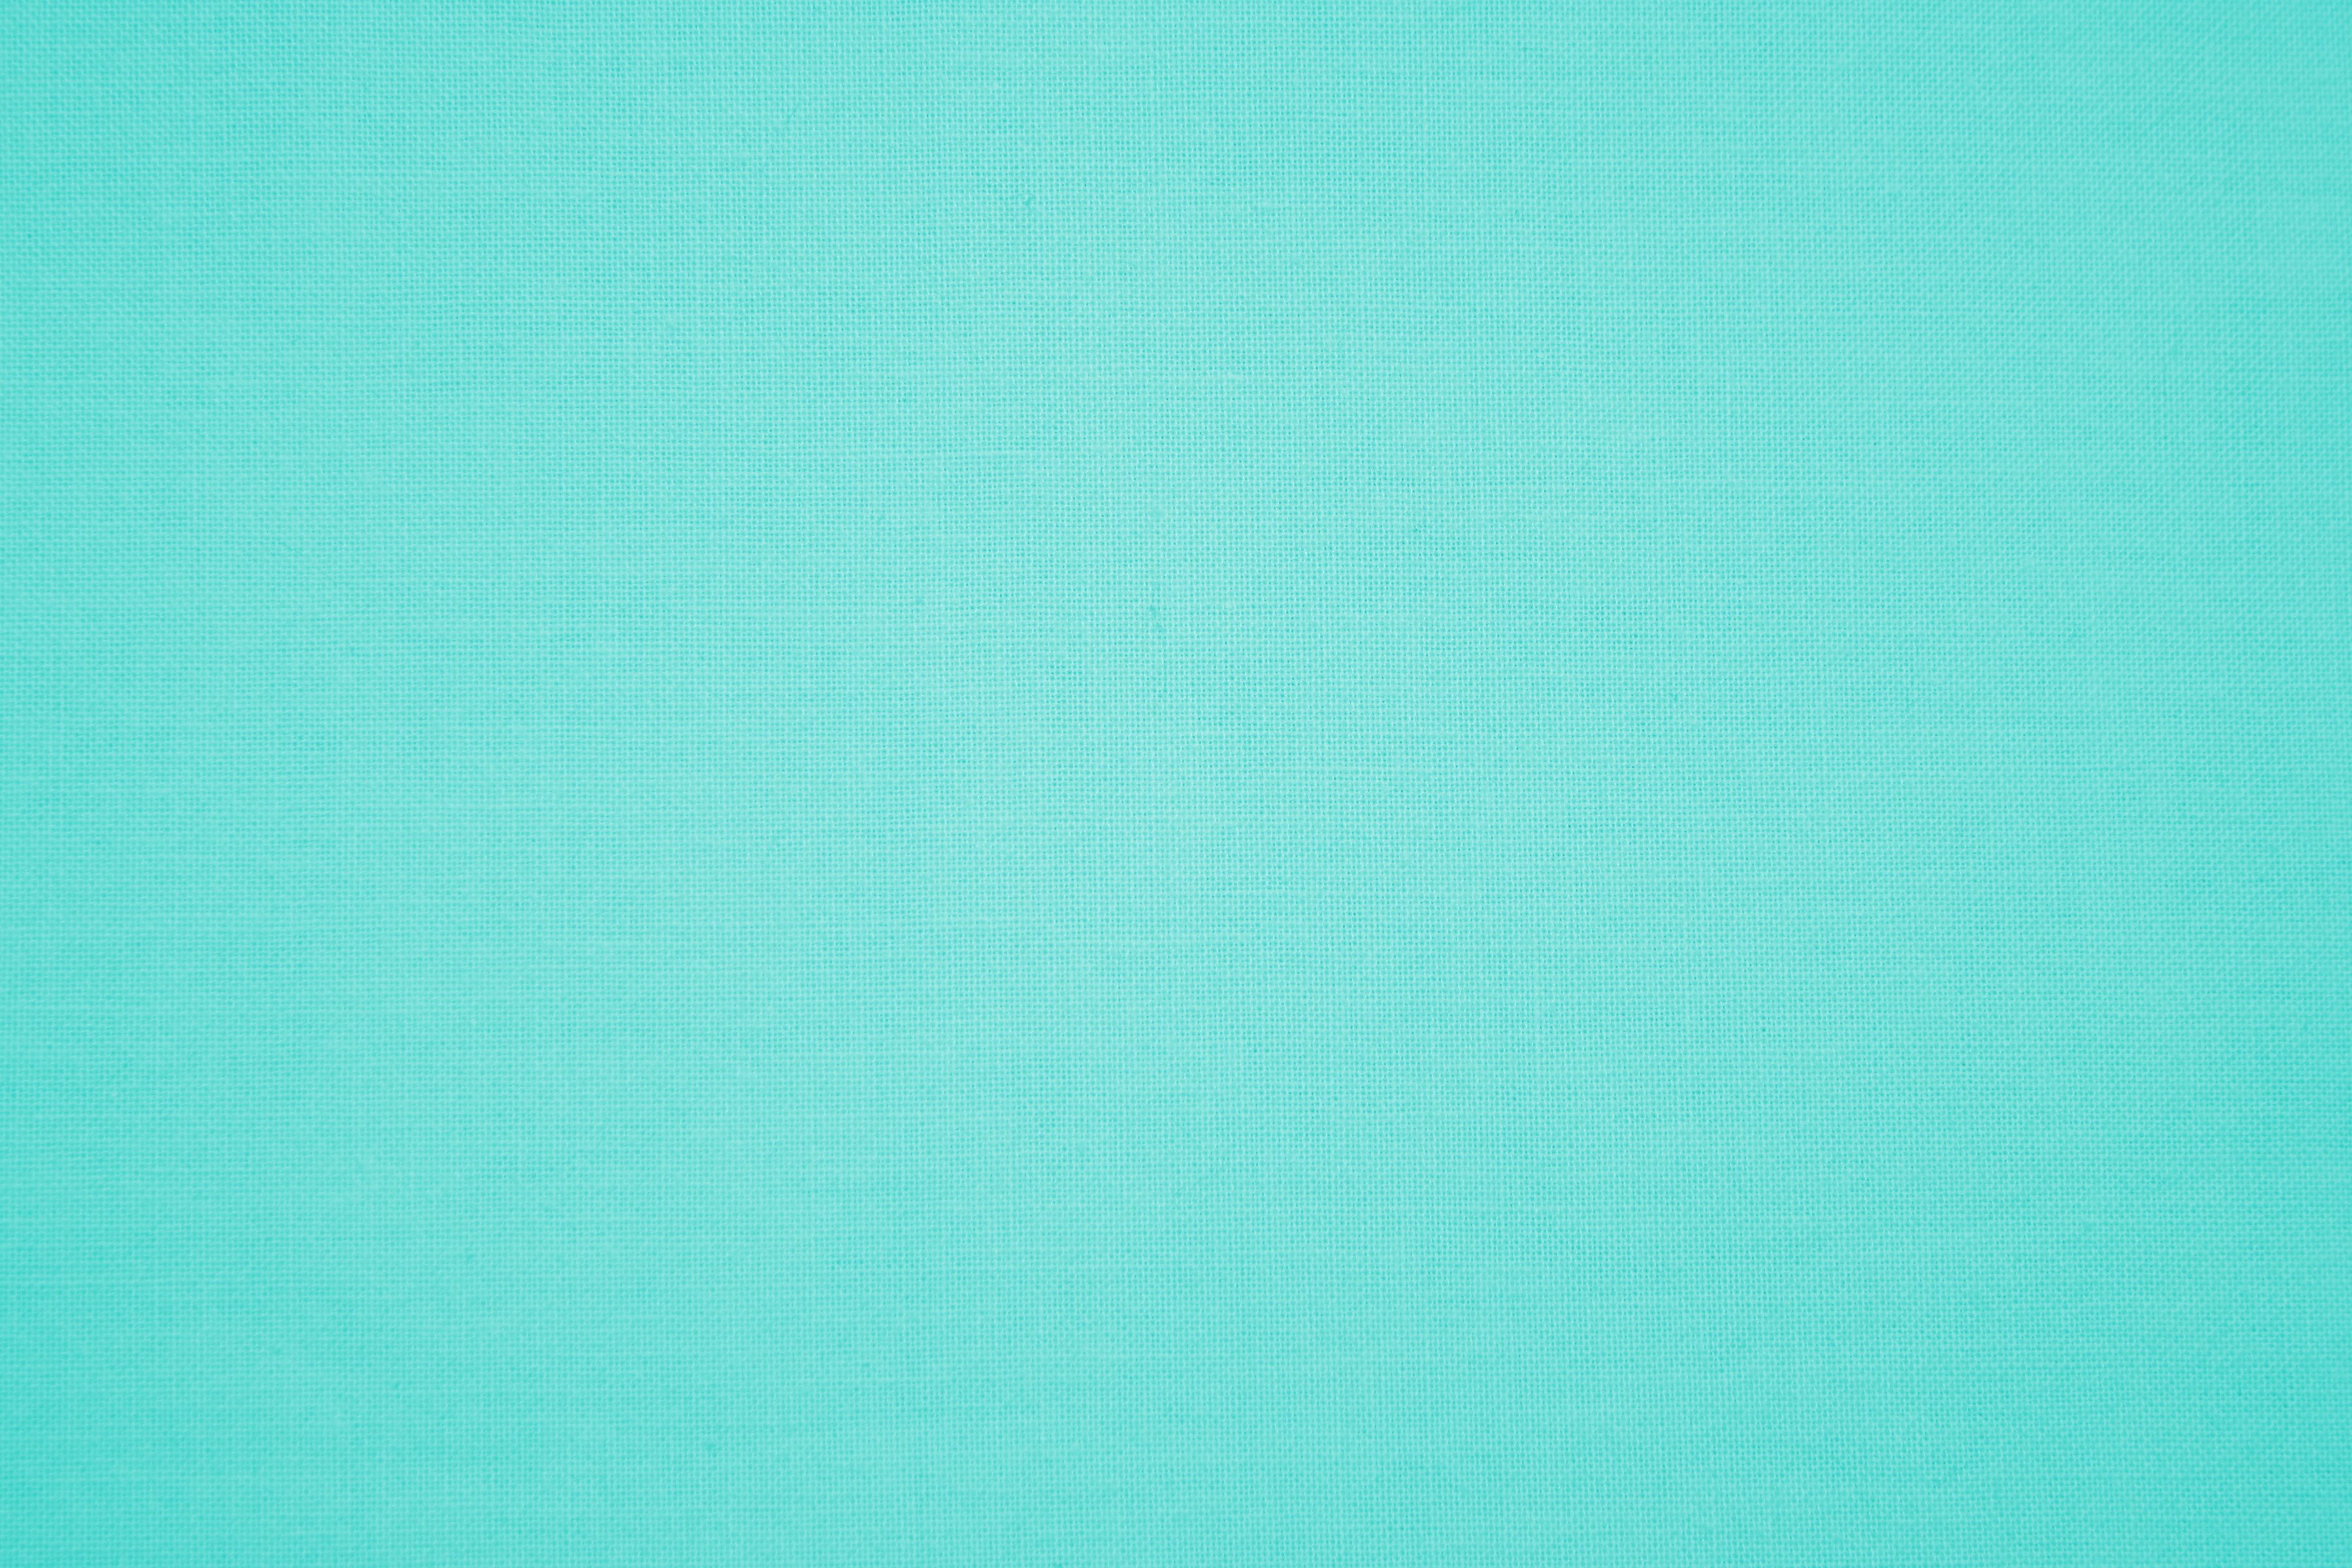 Hq Turquoise Wallpapers - Baize - HD Wallpaper 